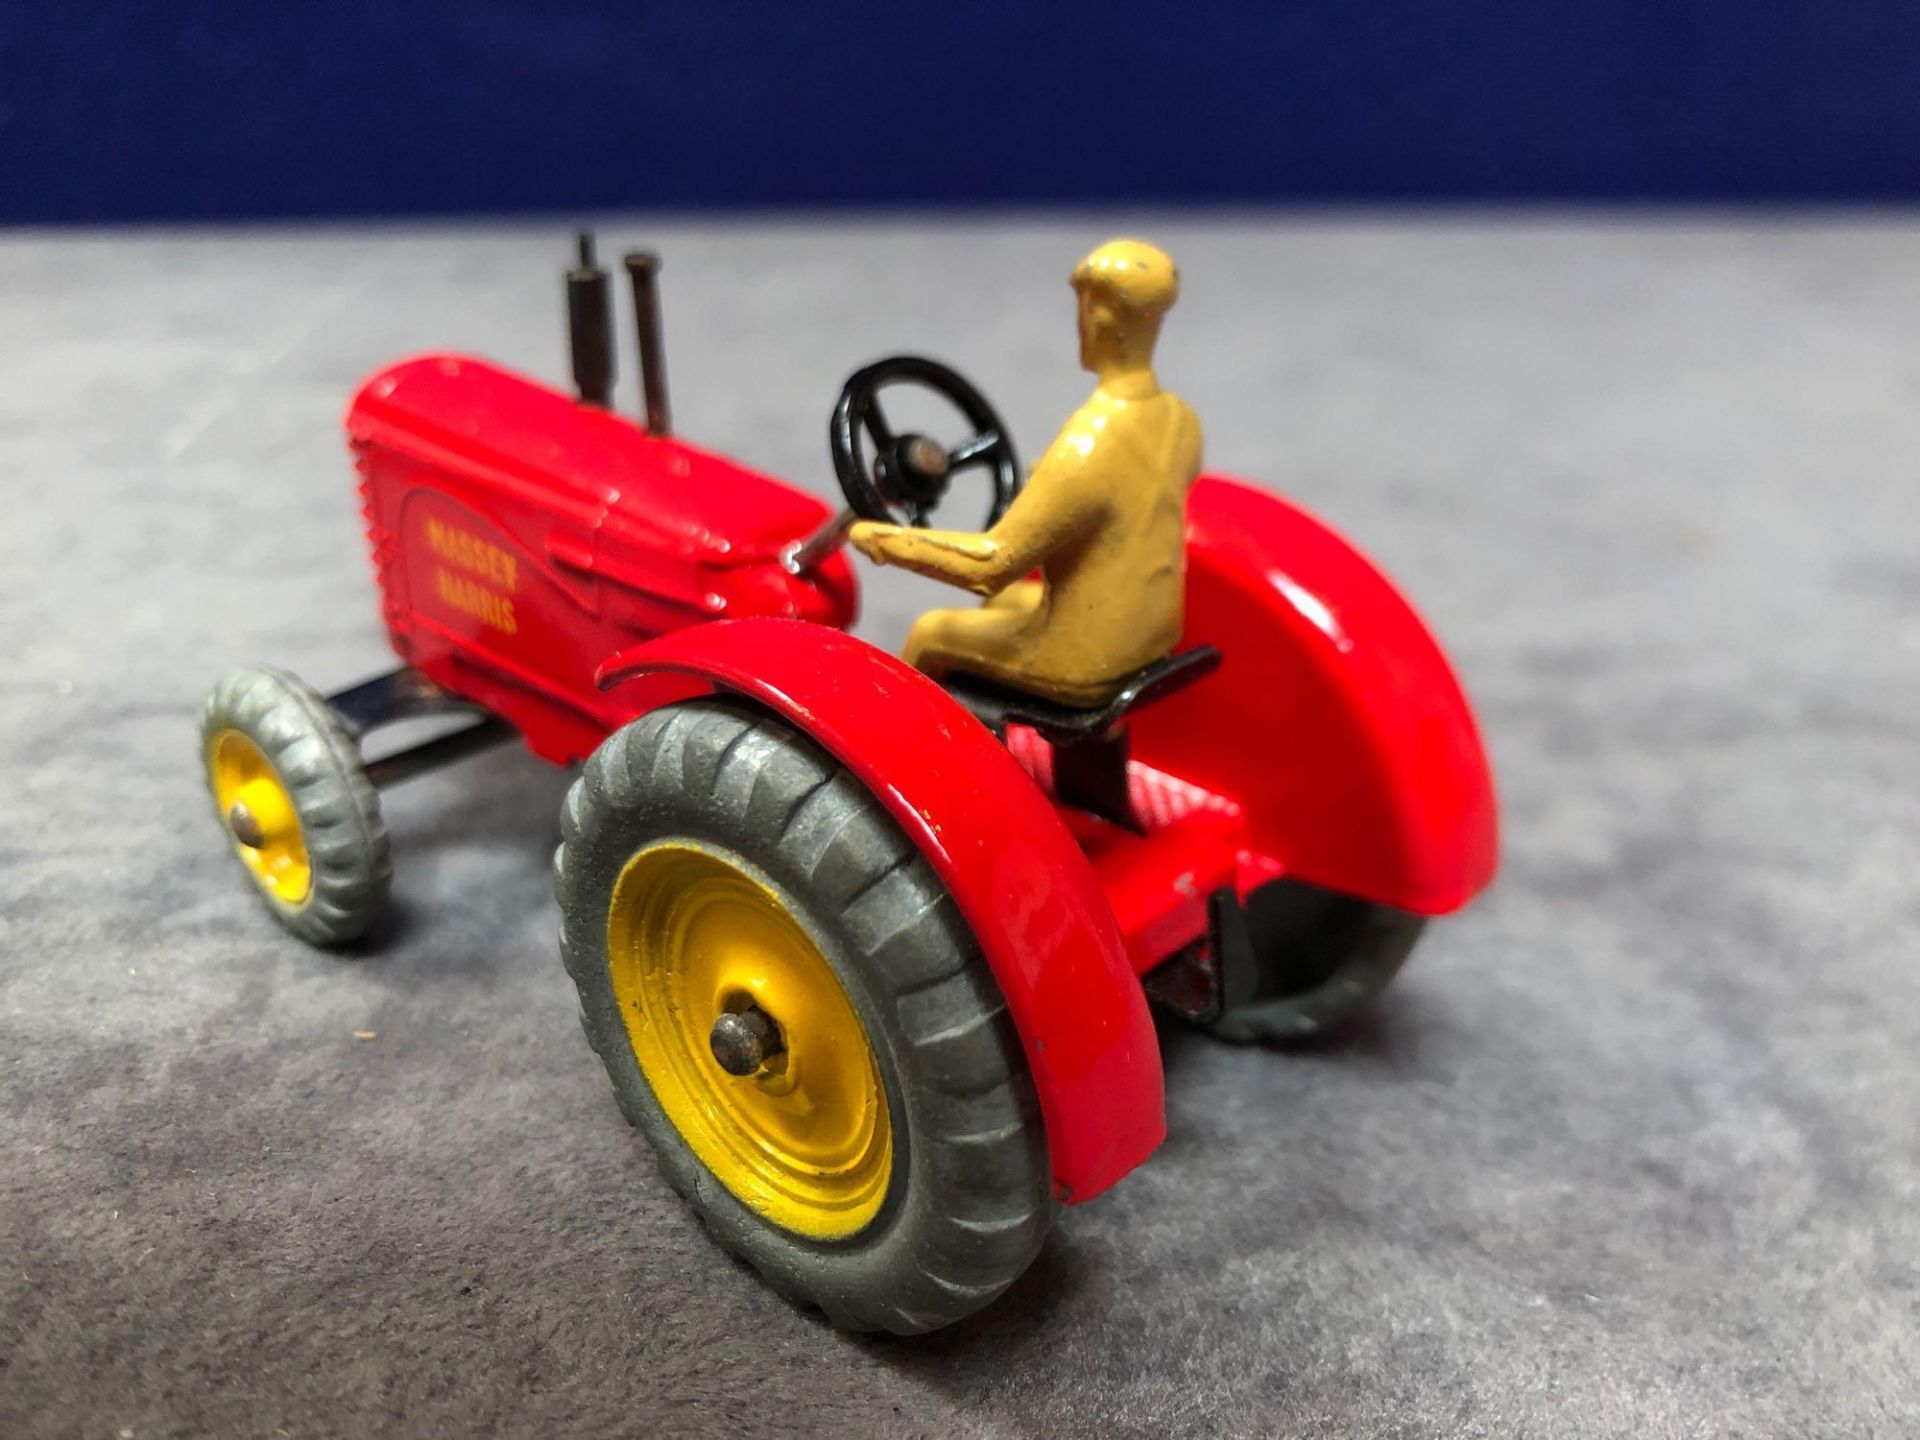 Dinky #300 Massey Harris Tractor Mint In Near Mint Slightly Soiled Box 1966-1971 - Image 3 of 4